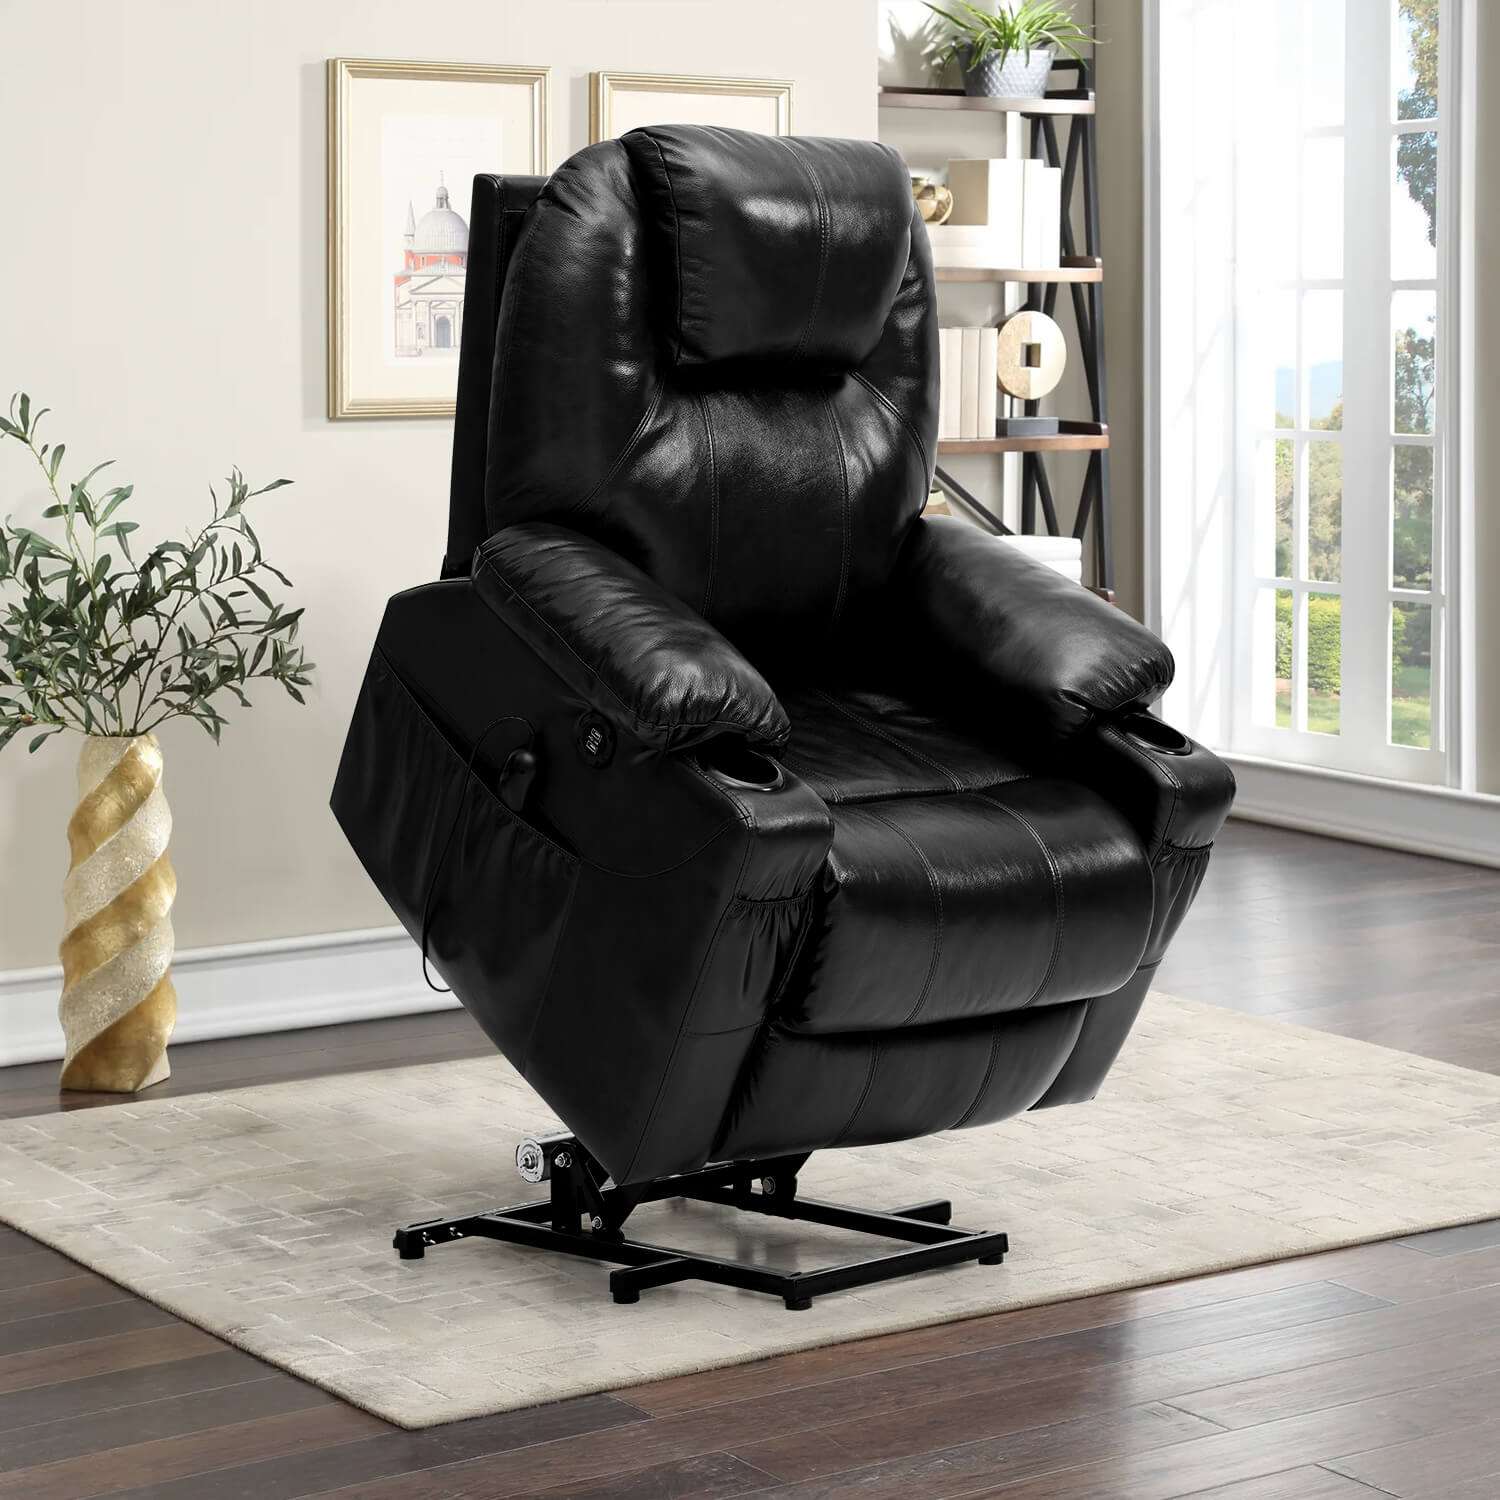 Soulout genuine leather black lift chairs